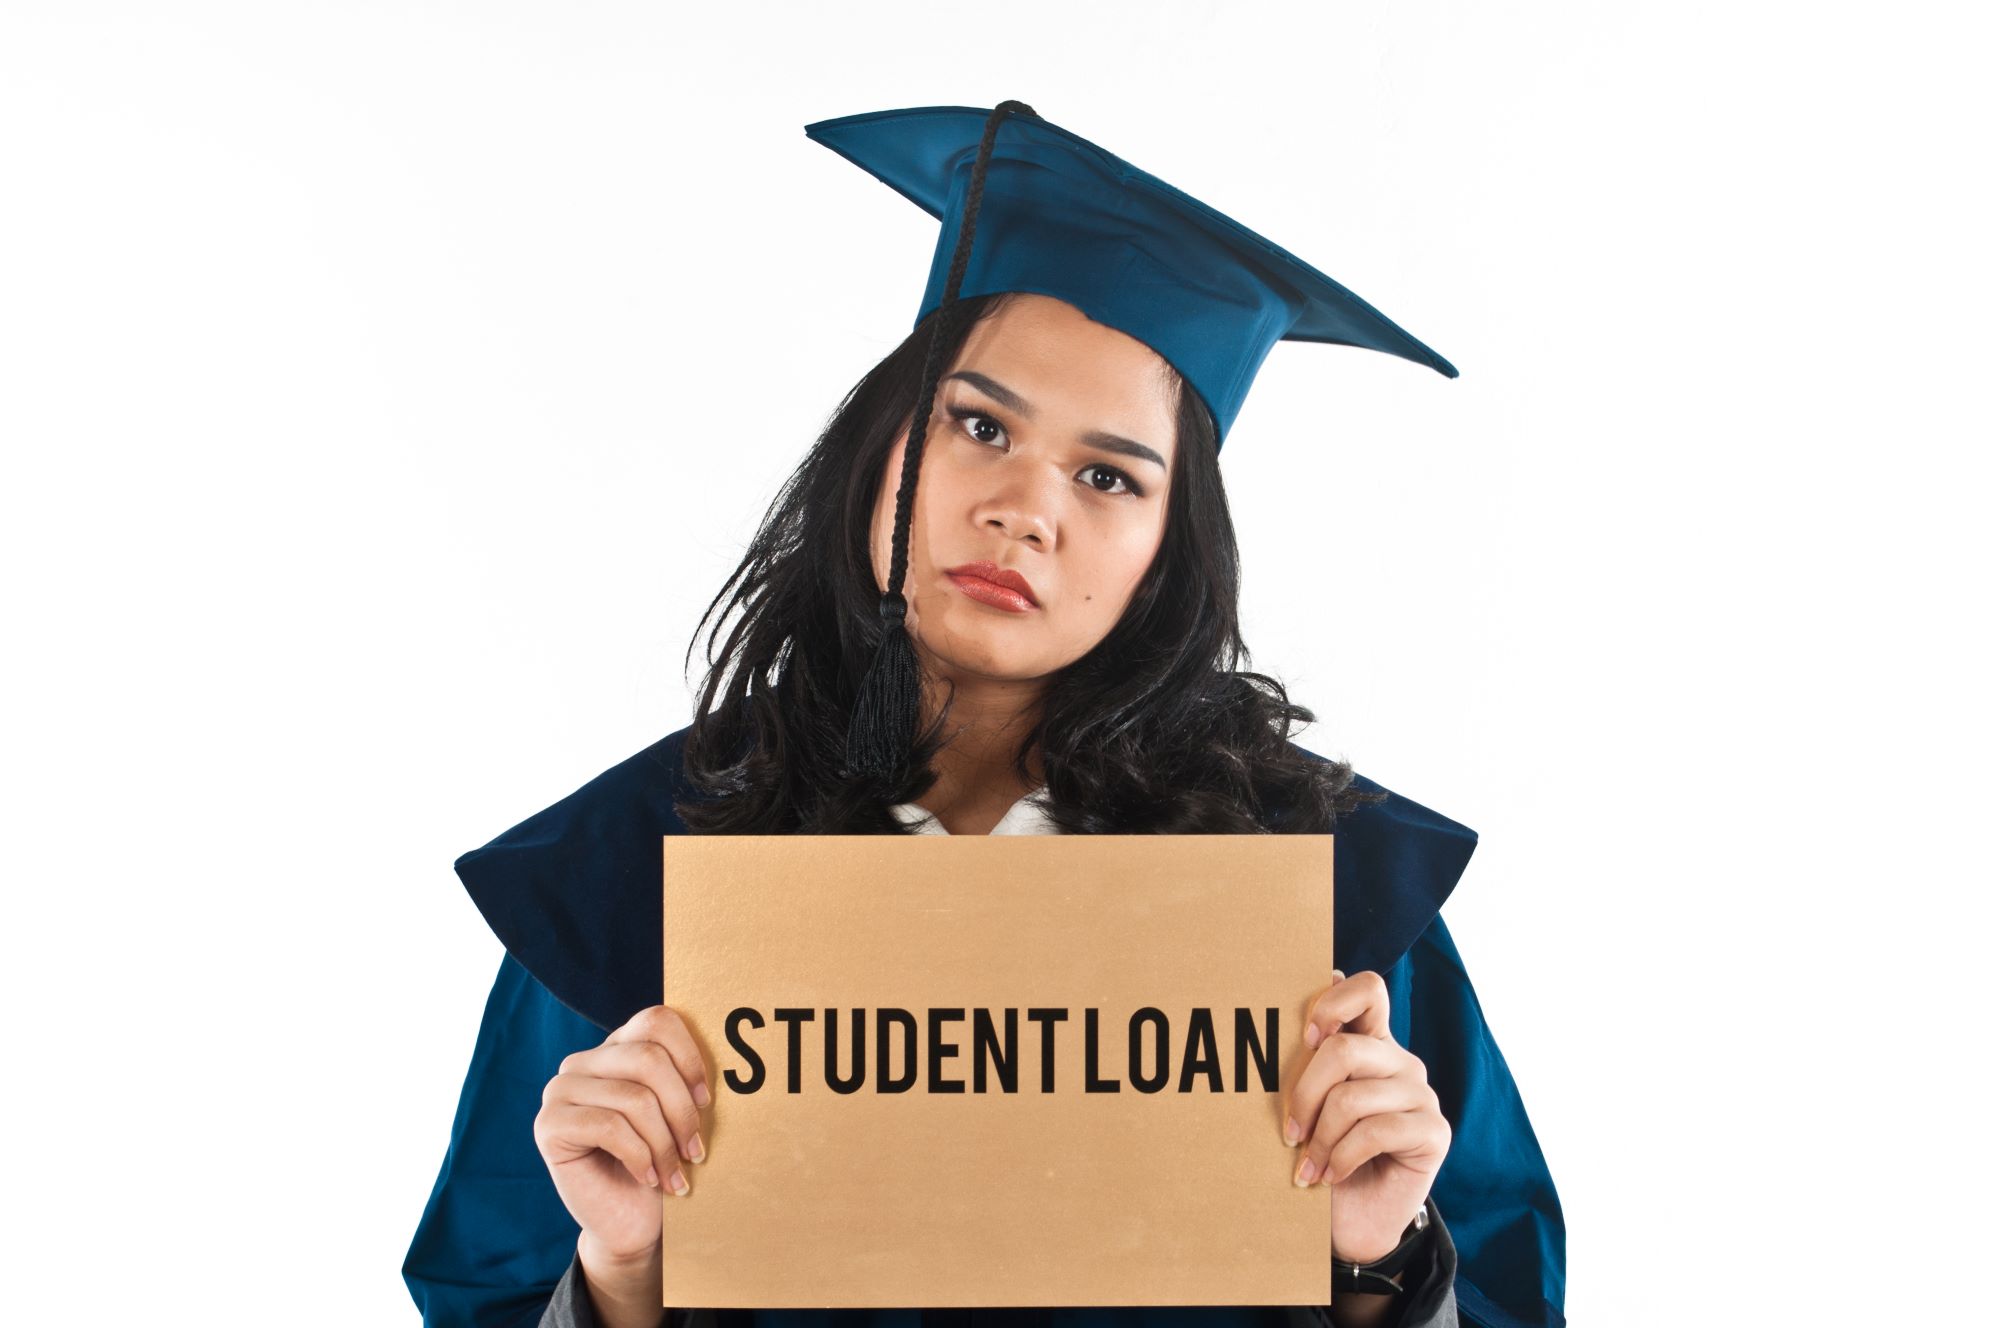 Student Loan Debt Payment and Management - Enid Kathambi